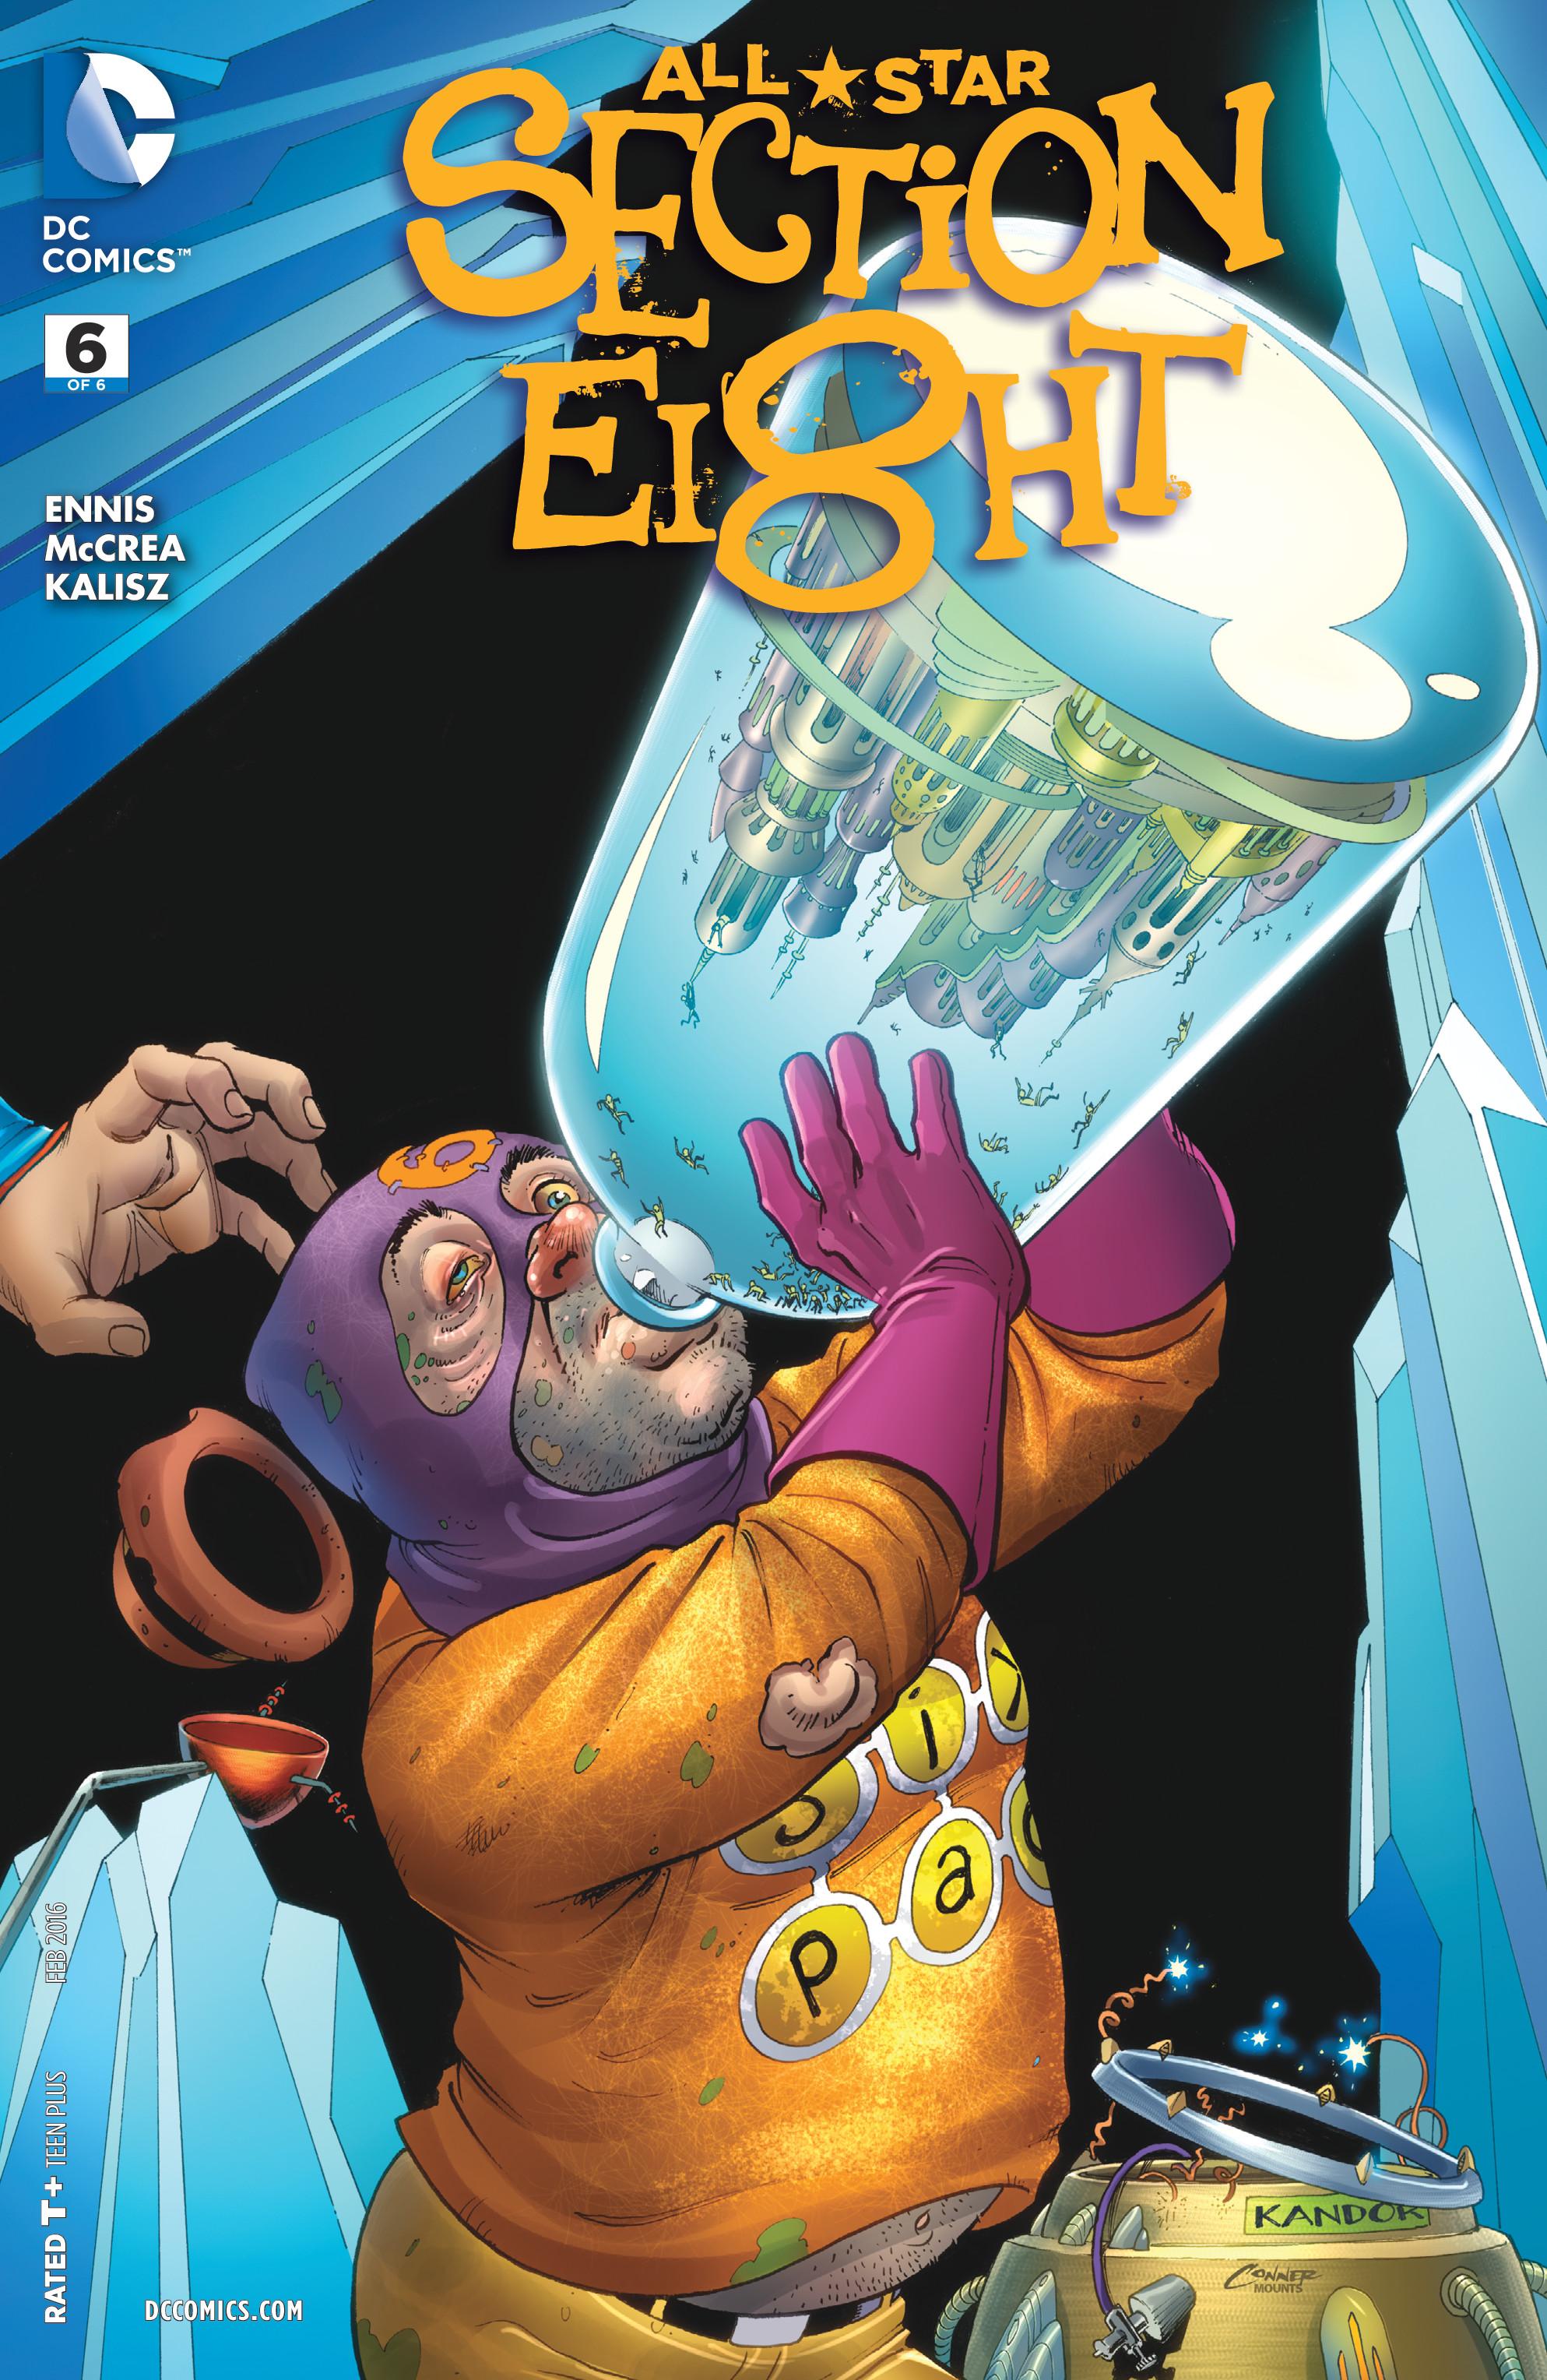 All Star Section Eight Vol. 1 #6